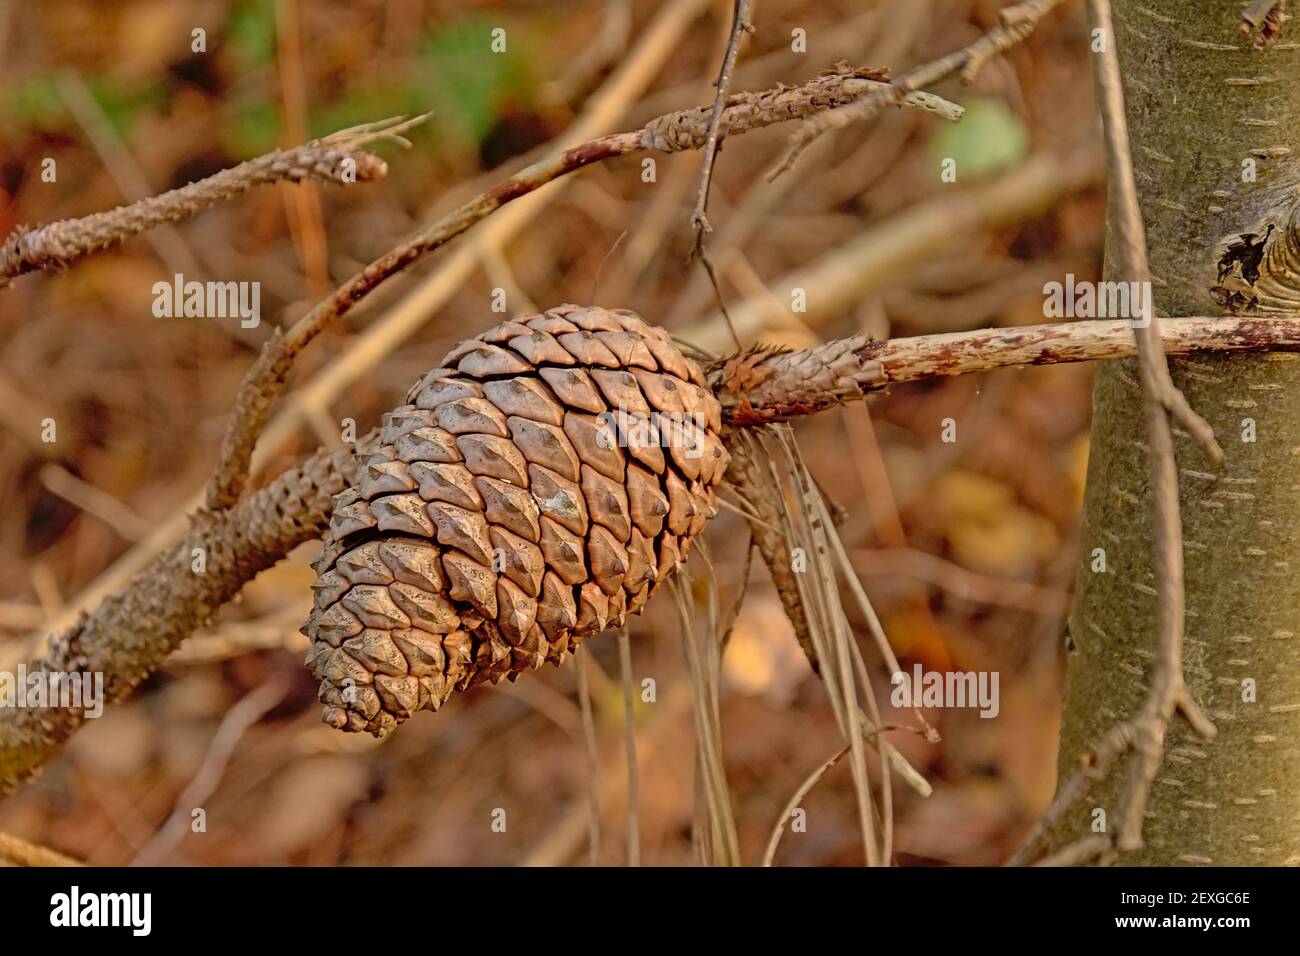 Spruce cone on a twig in the forest Stock Photo